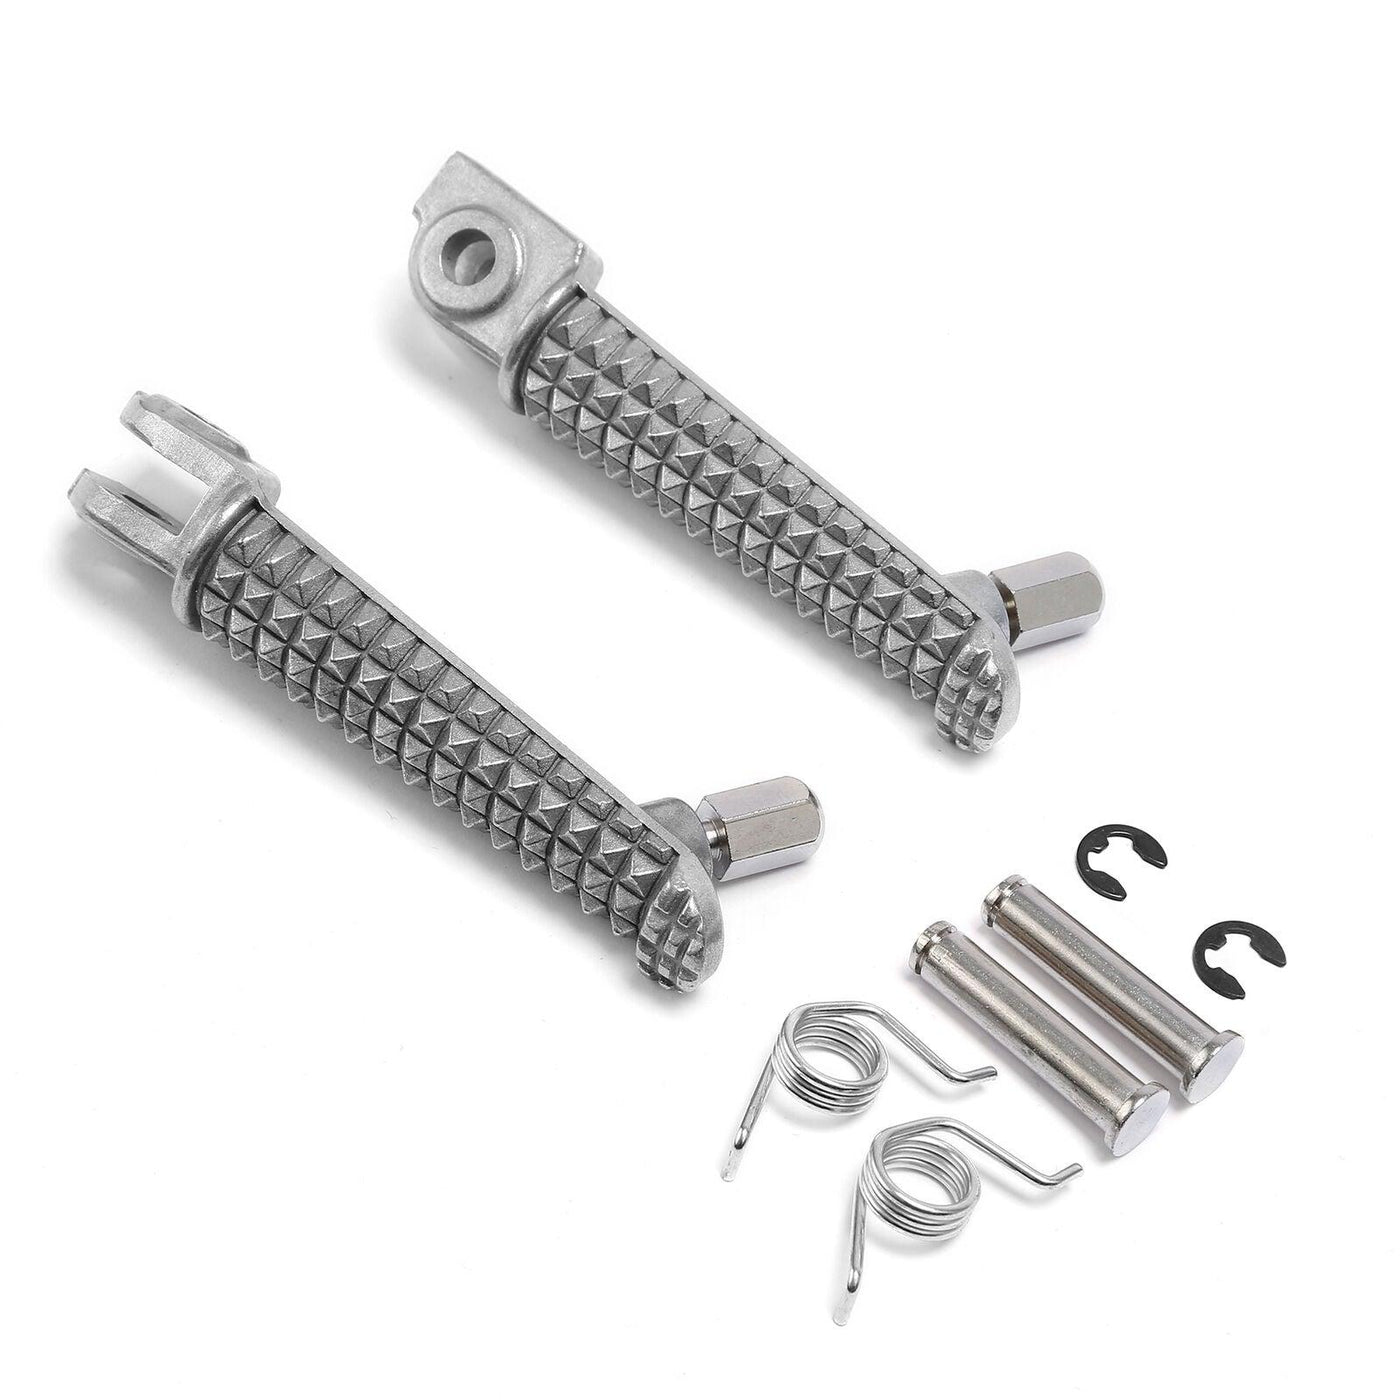 Front Foot Pegs Footrest For Yamaha YZF R1 98-14 YZF R6 99-17 YZF R6S 03-08 NEW - Moto Life Products